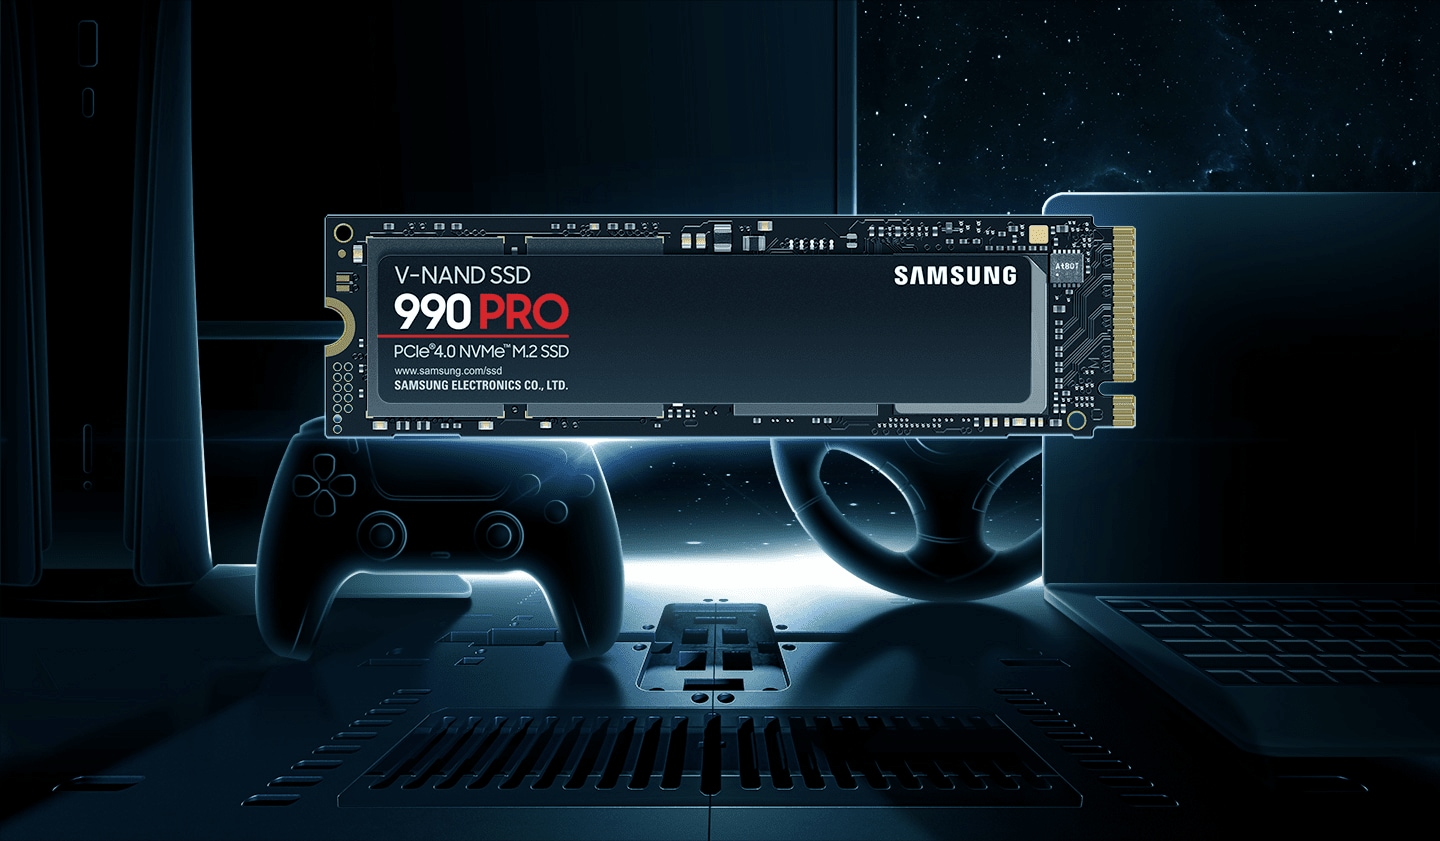 Samsung Semiconductor 990 PRO boosts random performance by over 55%, enabling faster loading for gaming.